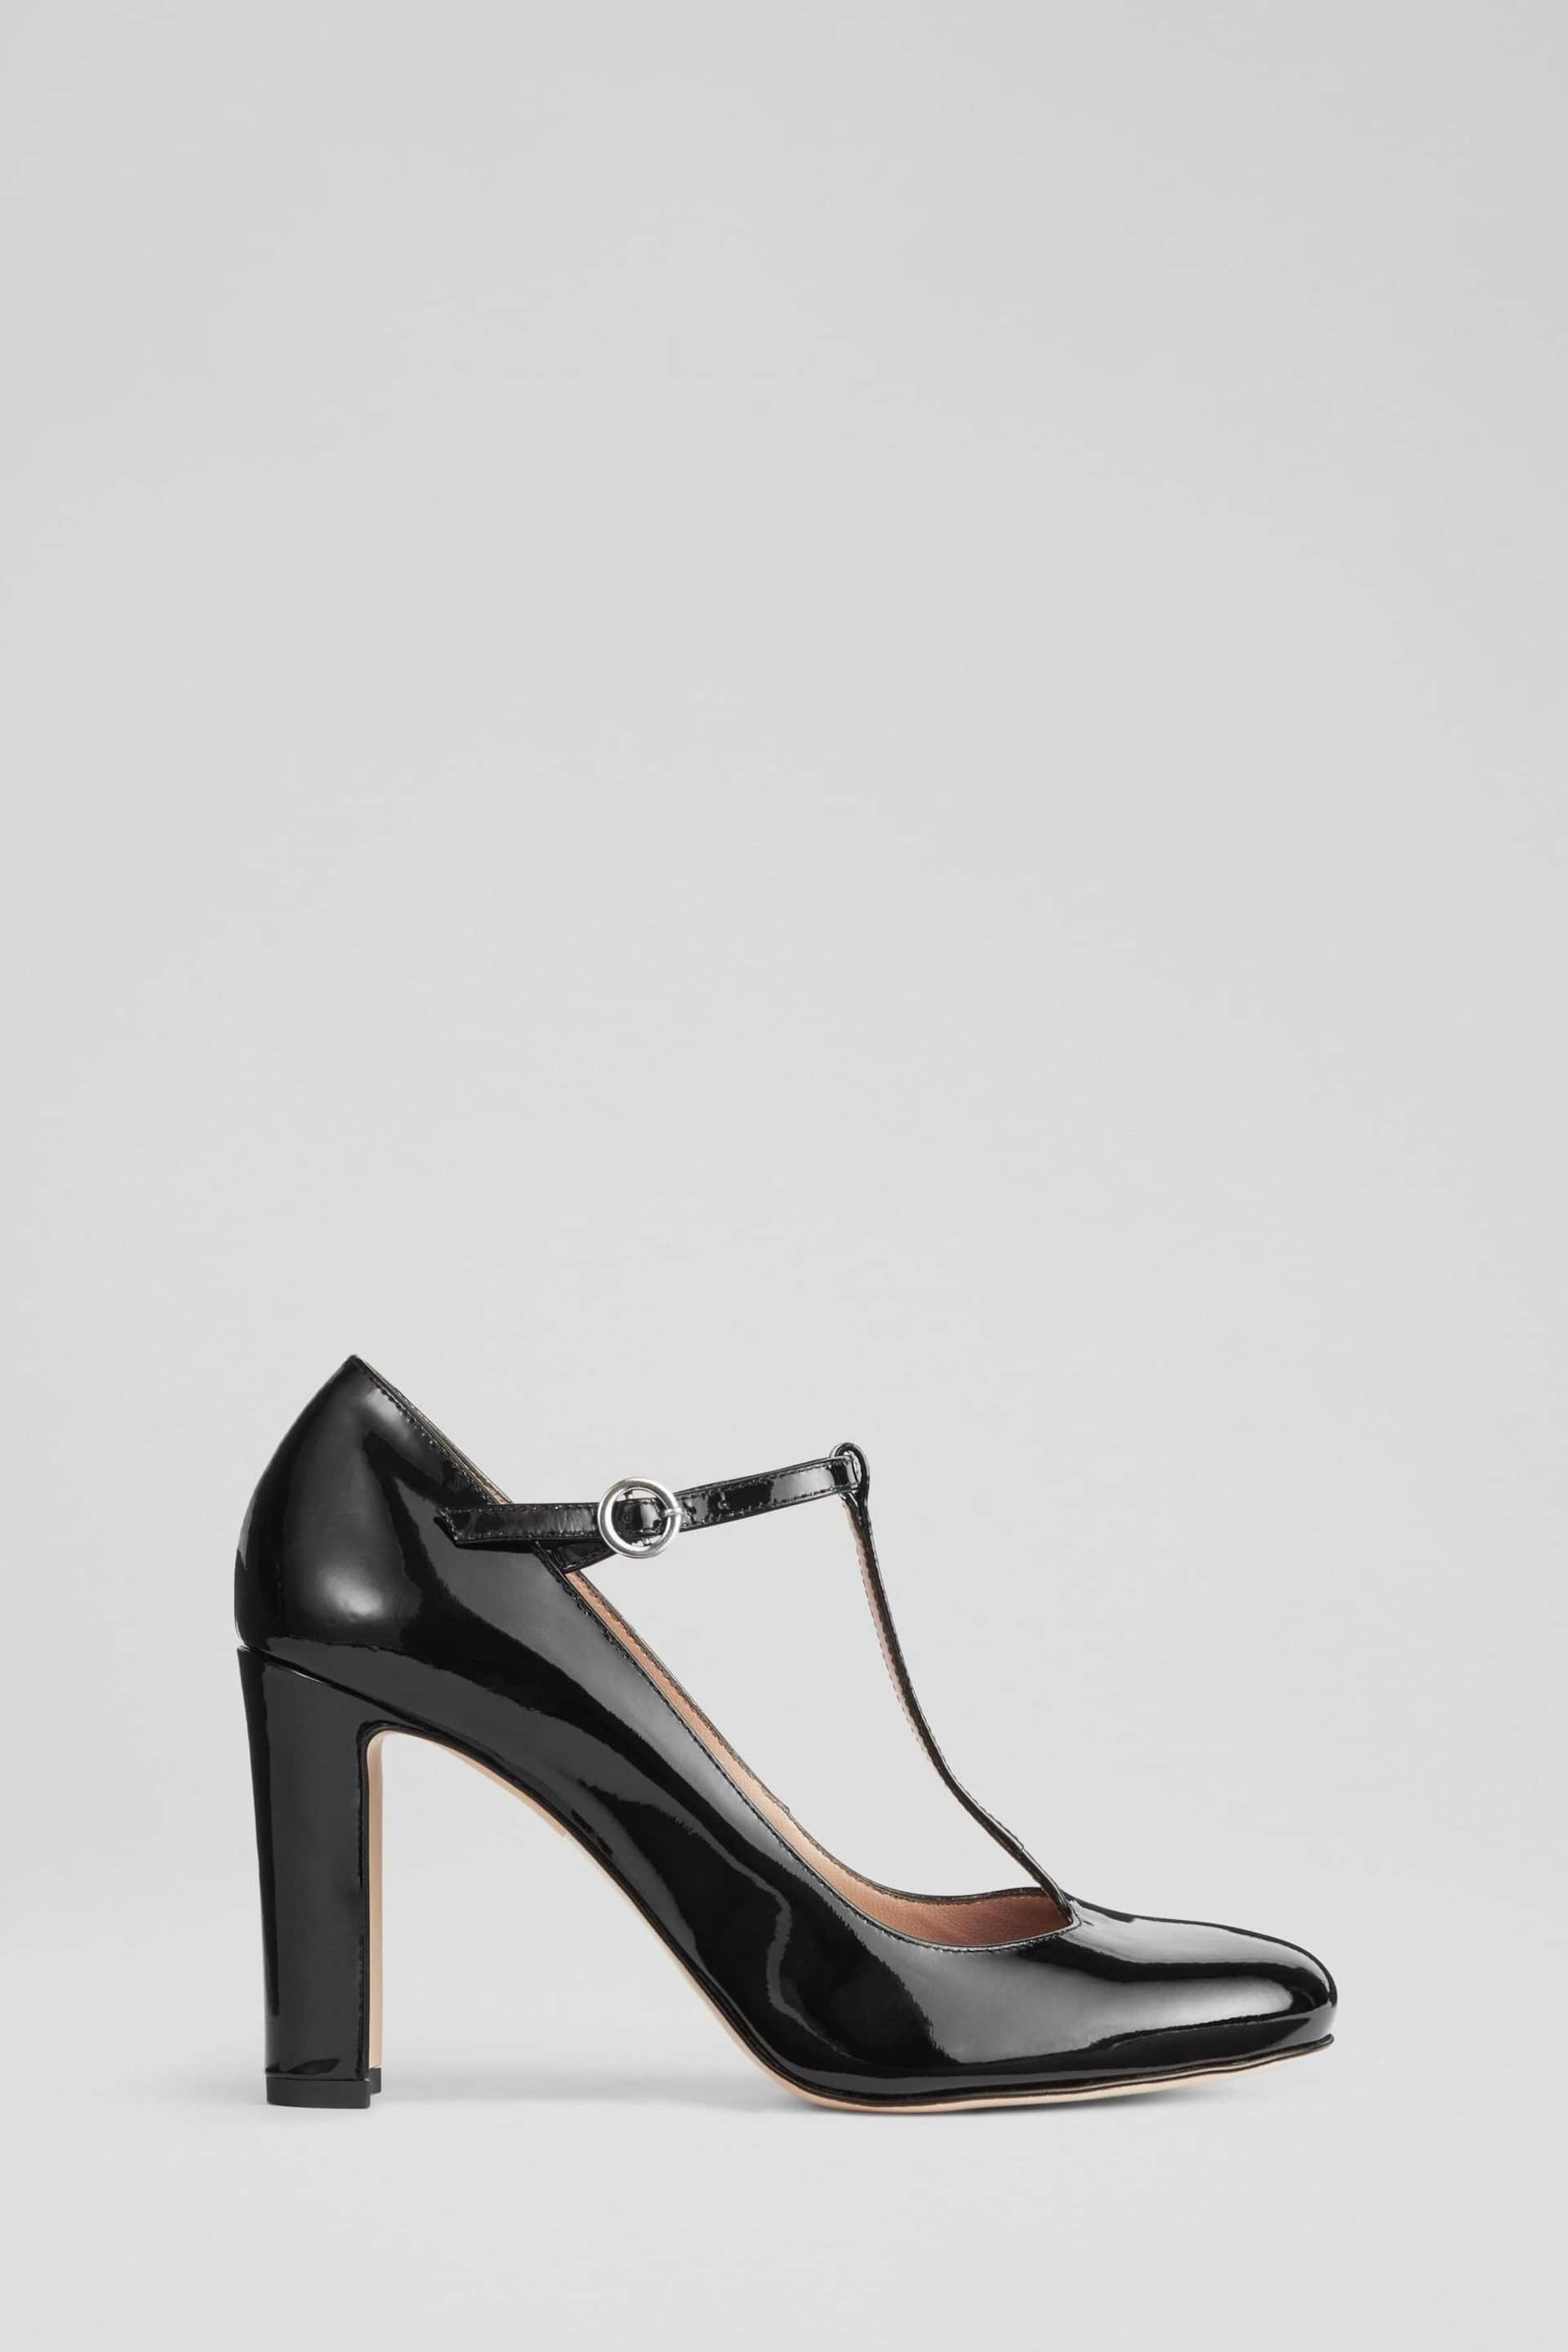 LK Bennett Annalise Patent Leather T-Bar Shoes - Image 1 of 4